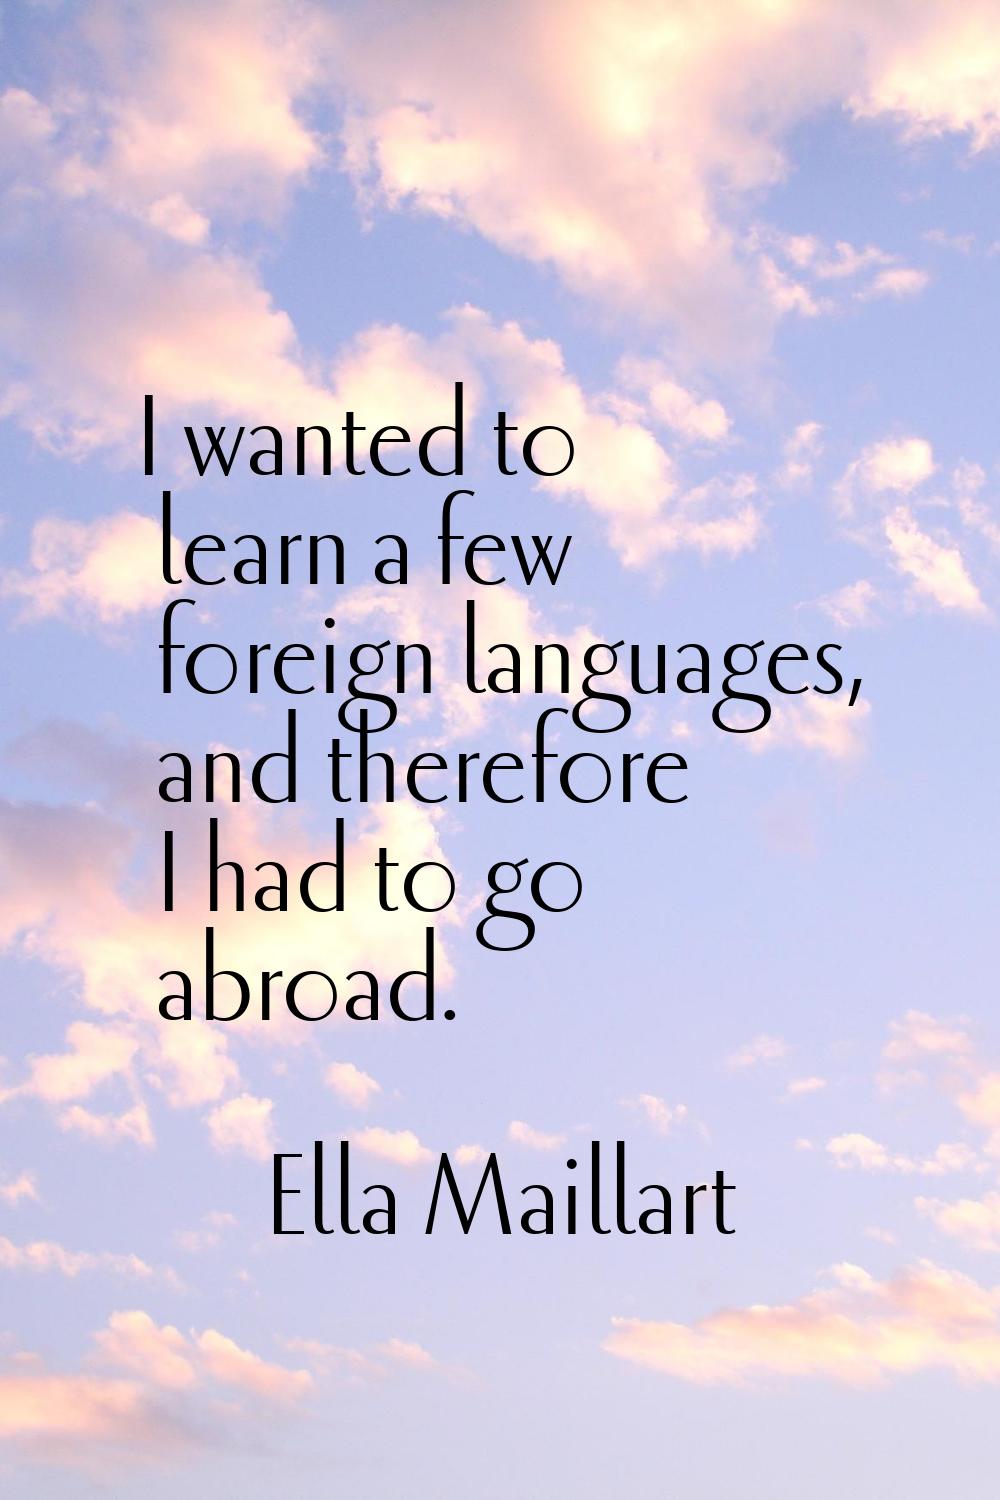 I wanted to learn a few foreign languages, and therefore I had to go abroad.